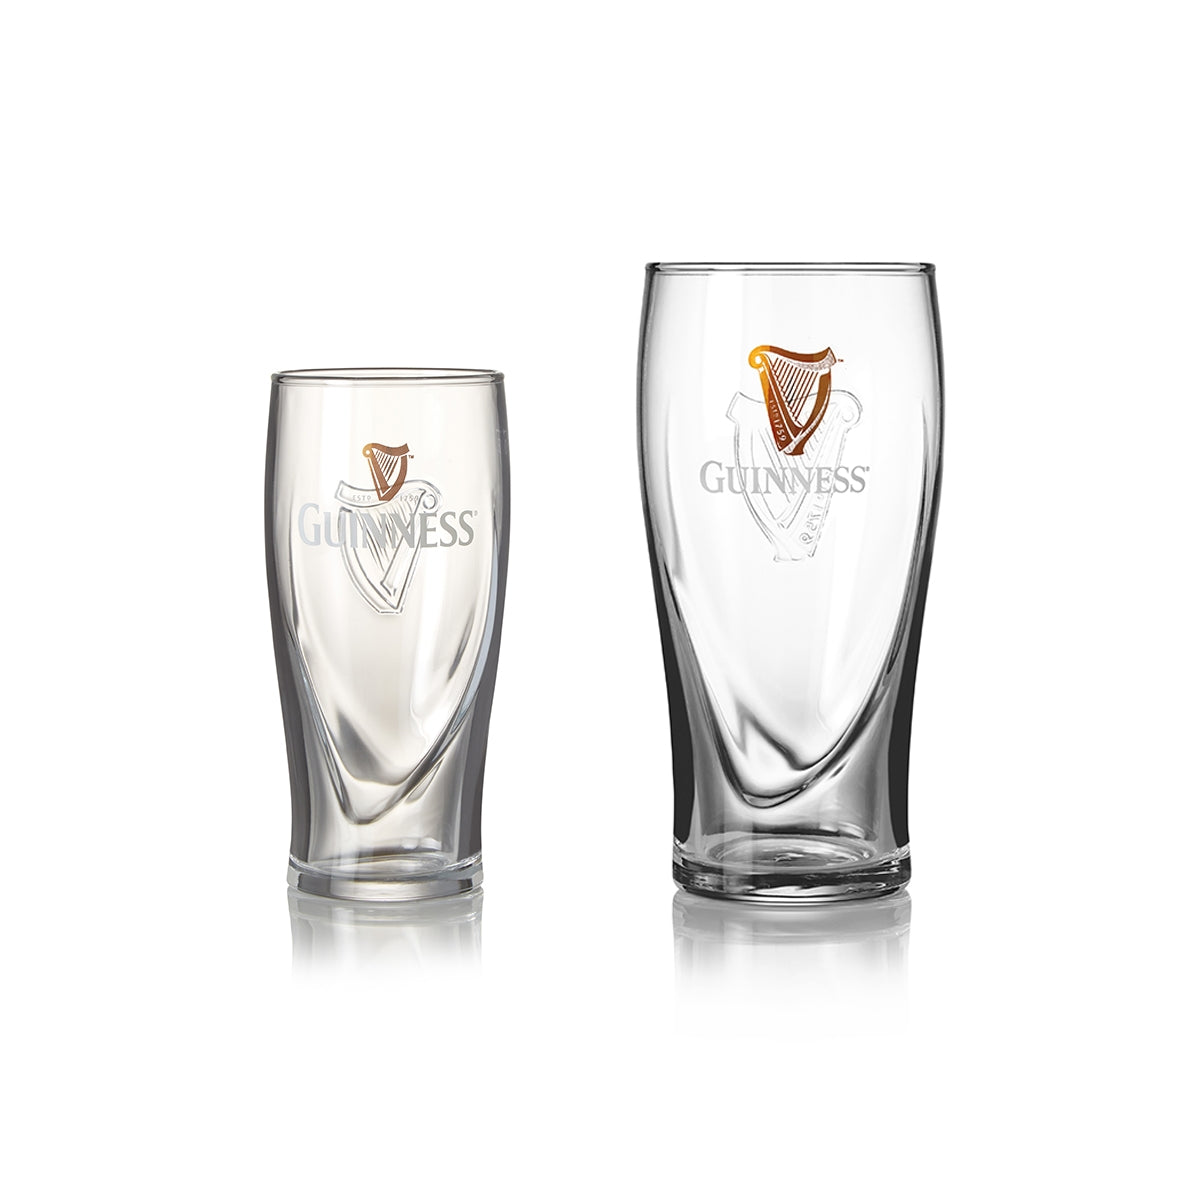 Two Guinness Half Pint Glass 24 Pack on a white surface.